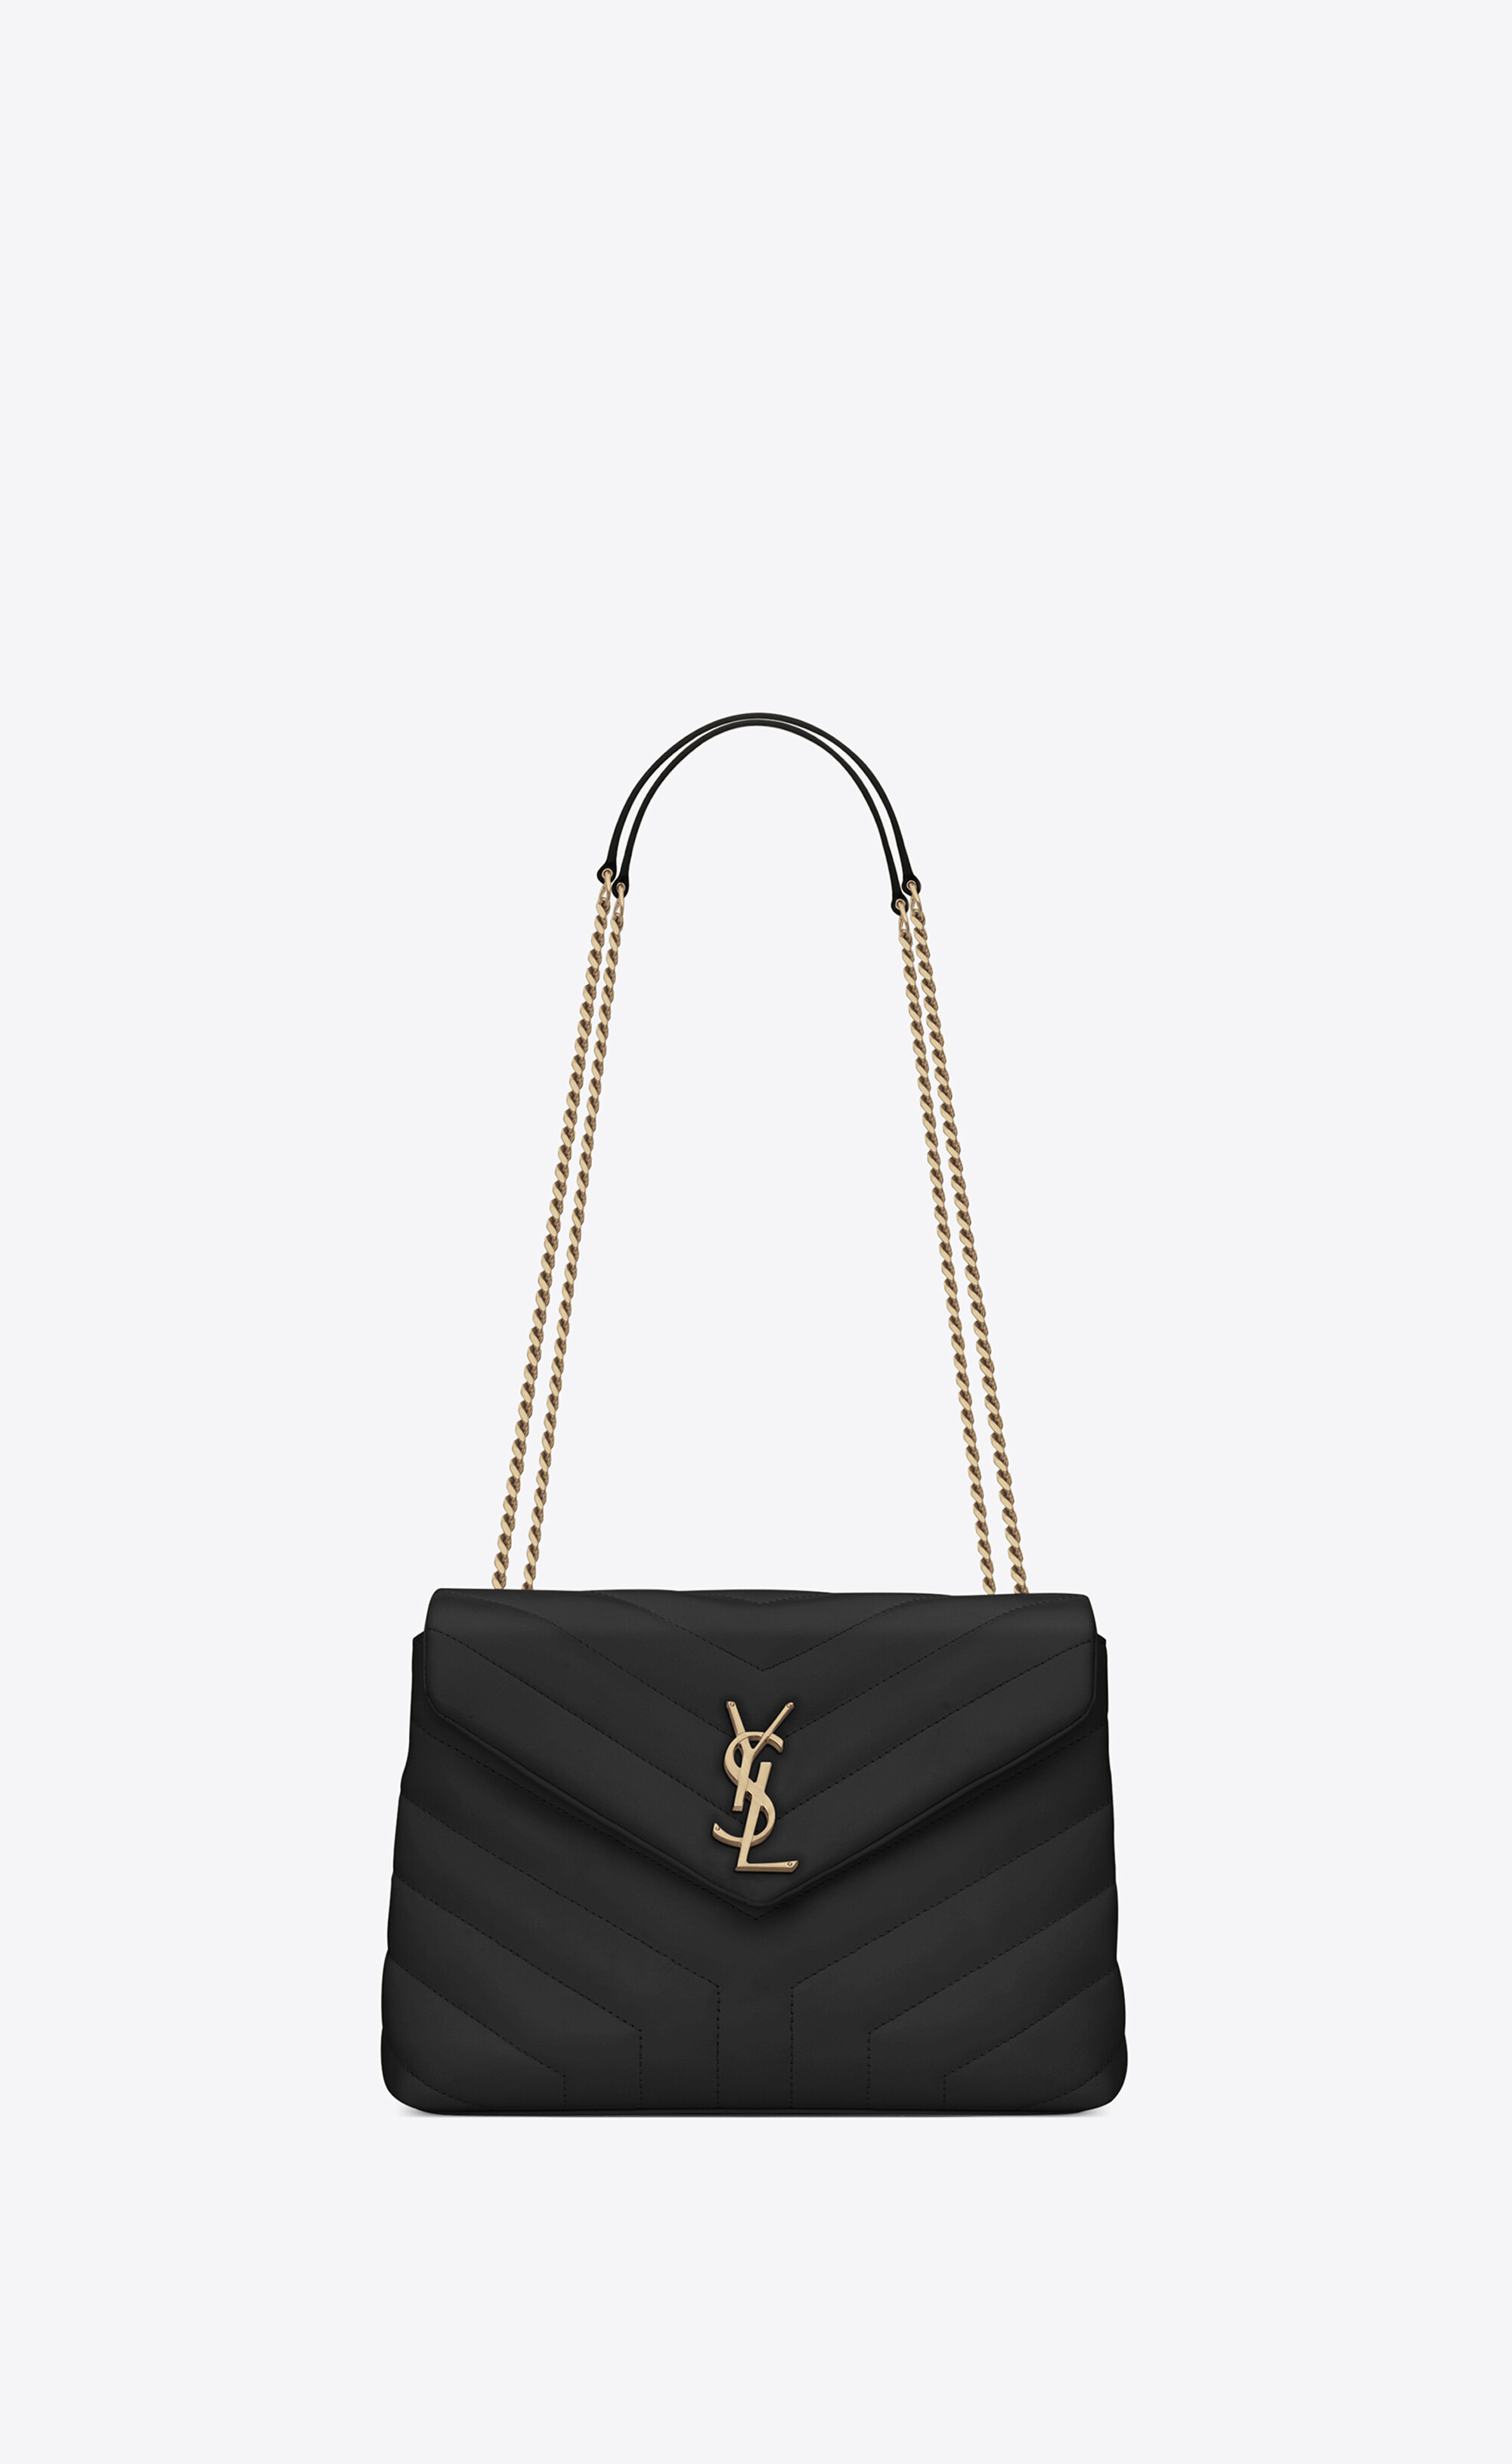 SMALL LOULOU IN QUILTED LEATHER | Saint Laurent | YSL.com